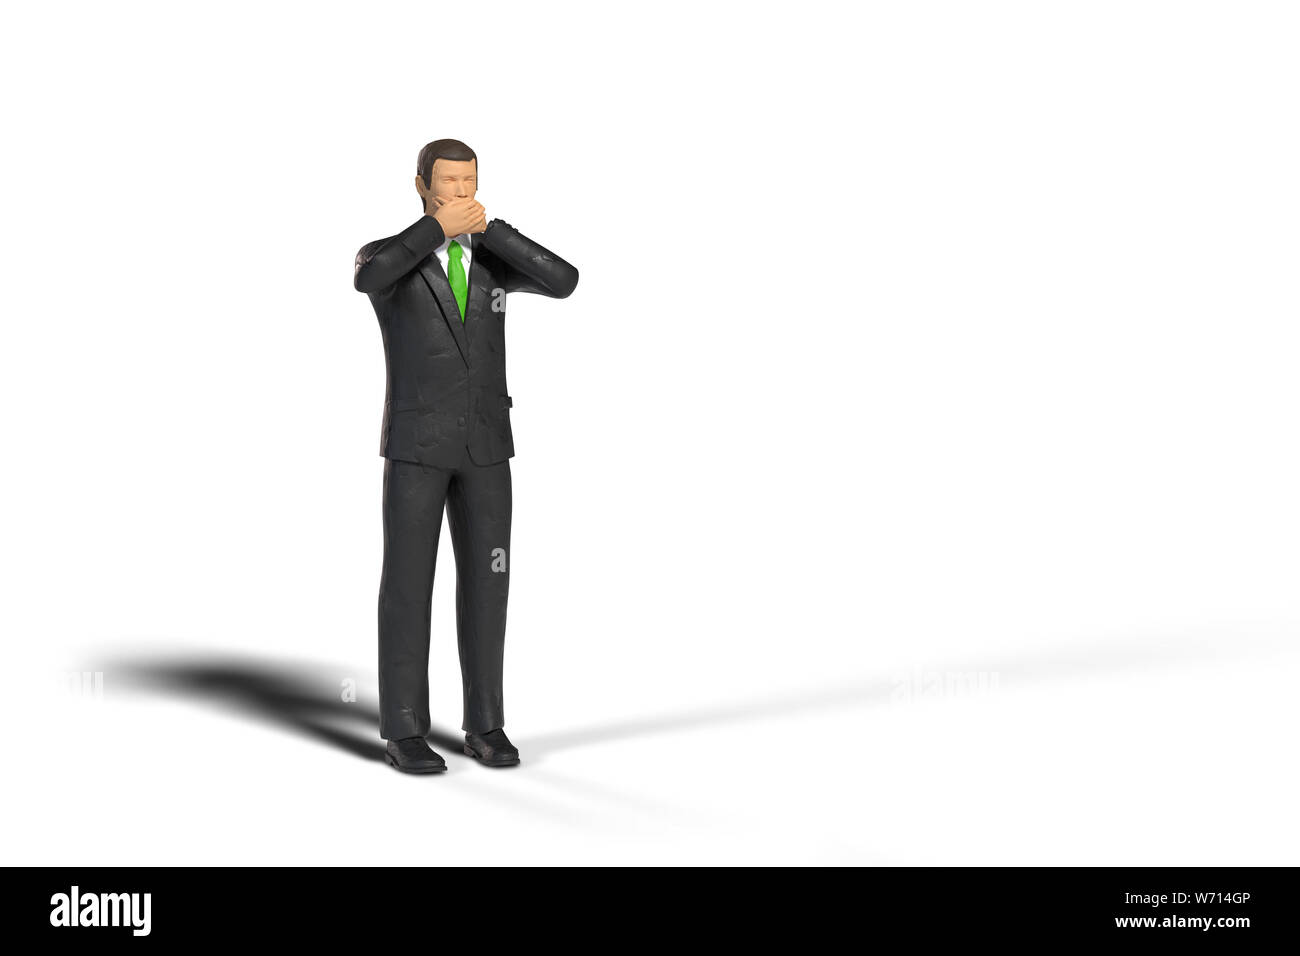 toy miniature businessman figure covering his mouth in front of empty space, concept isolated with shadow on white background Stock Photo